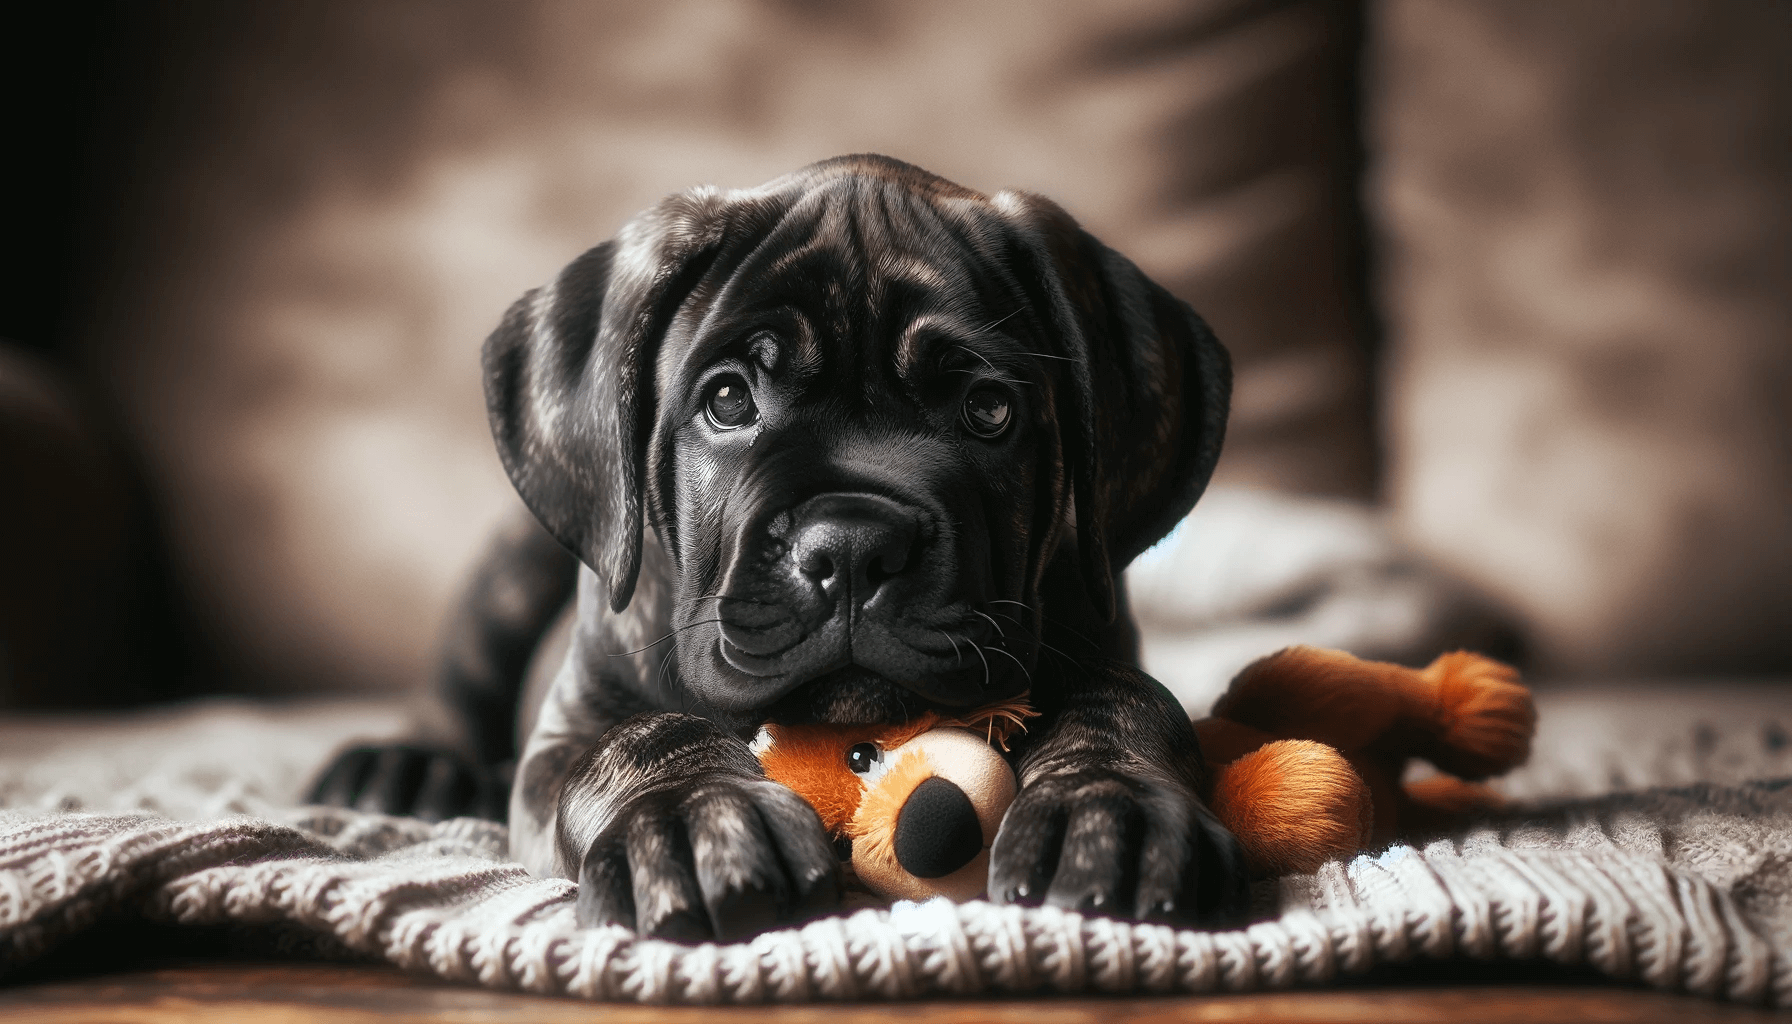 A brindle Cane Corso puppy lying down with a toy, predominantly black with faint brindle striping, showcasing its adorable playfulness.